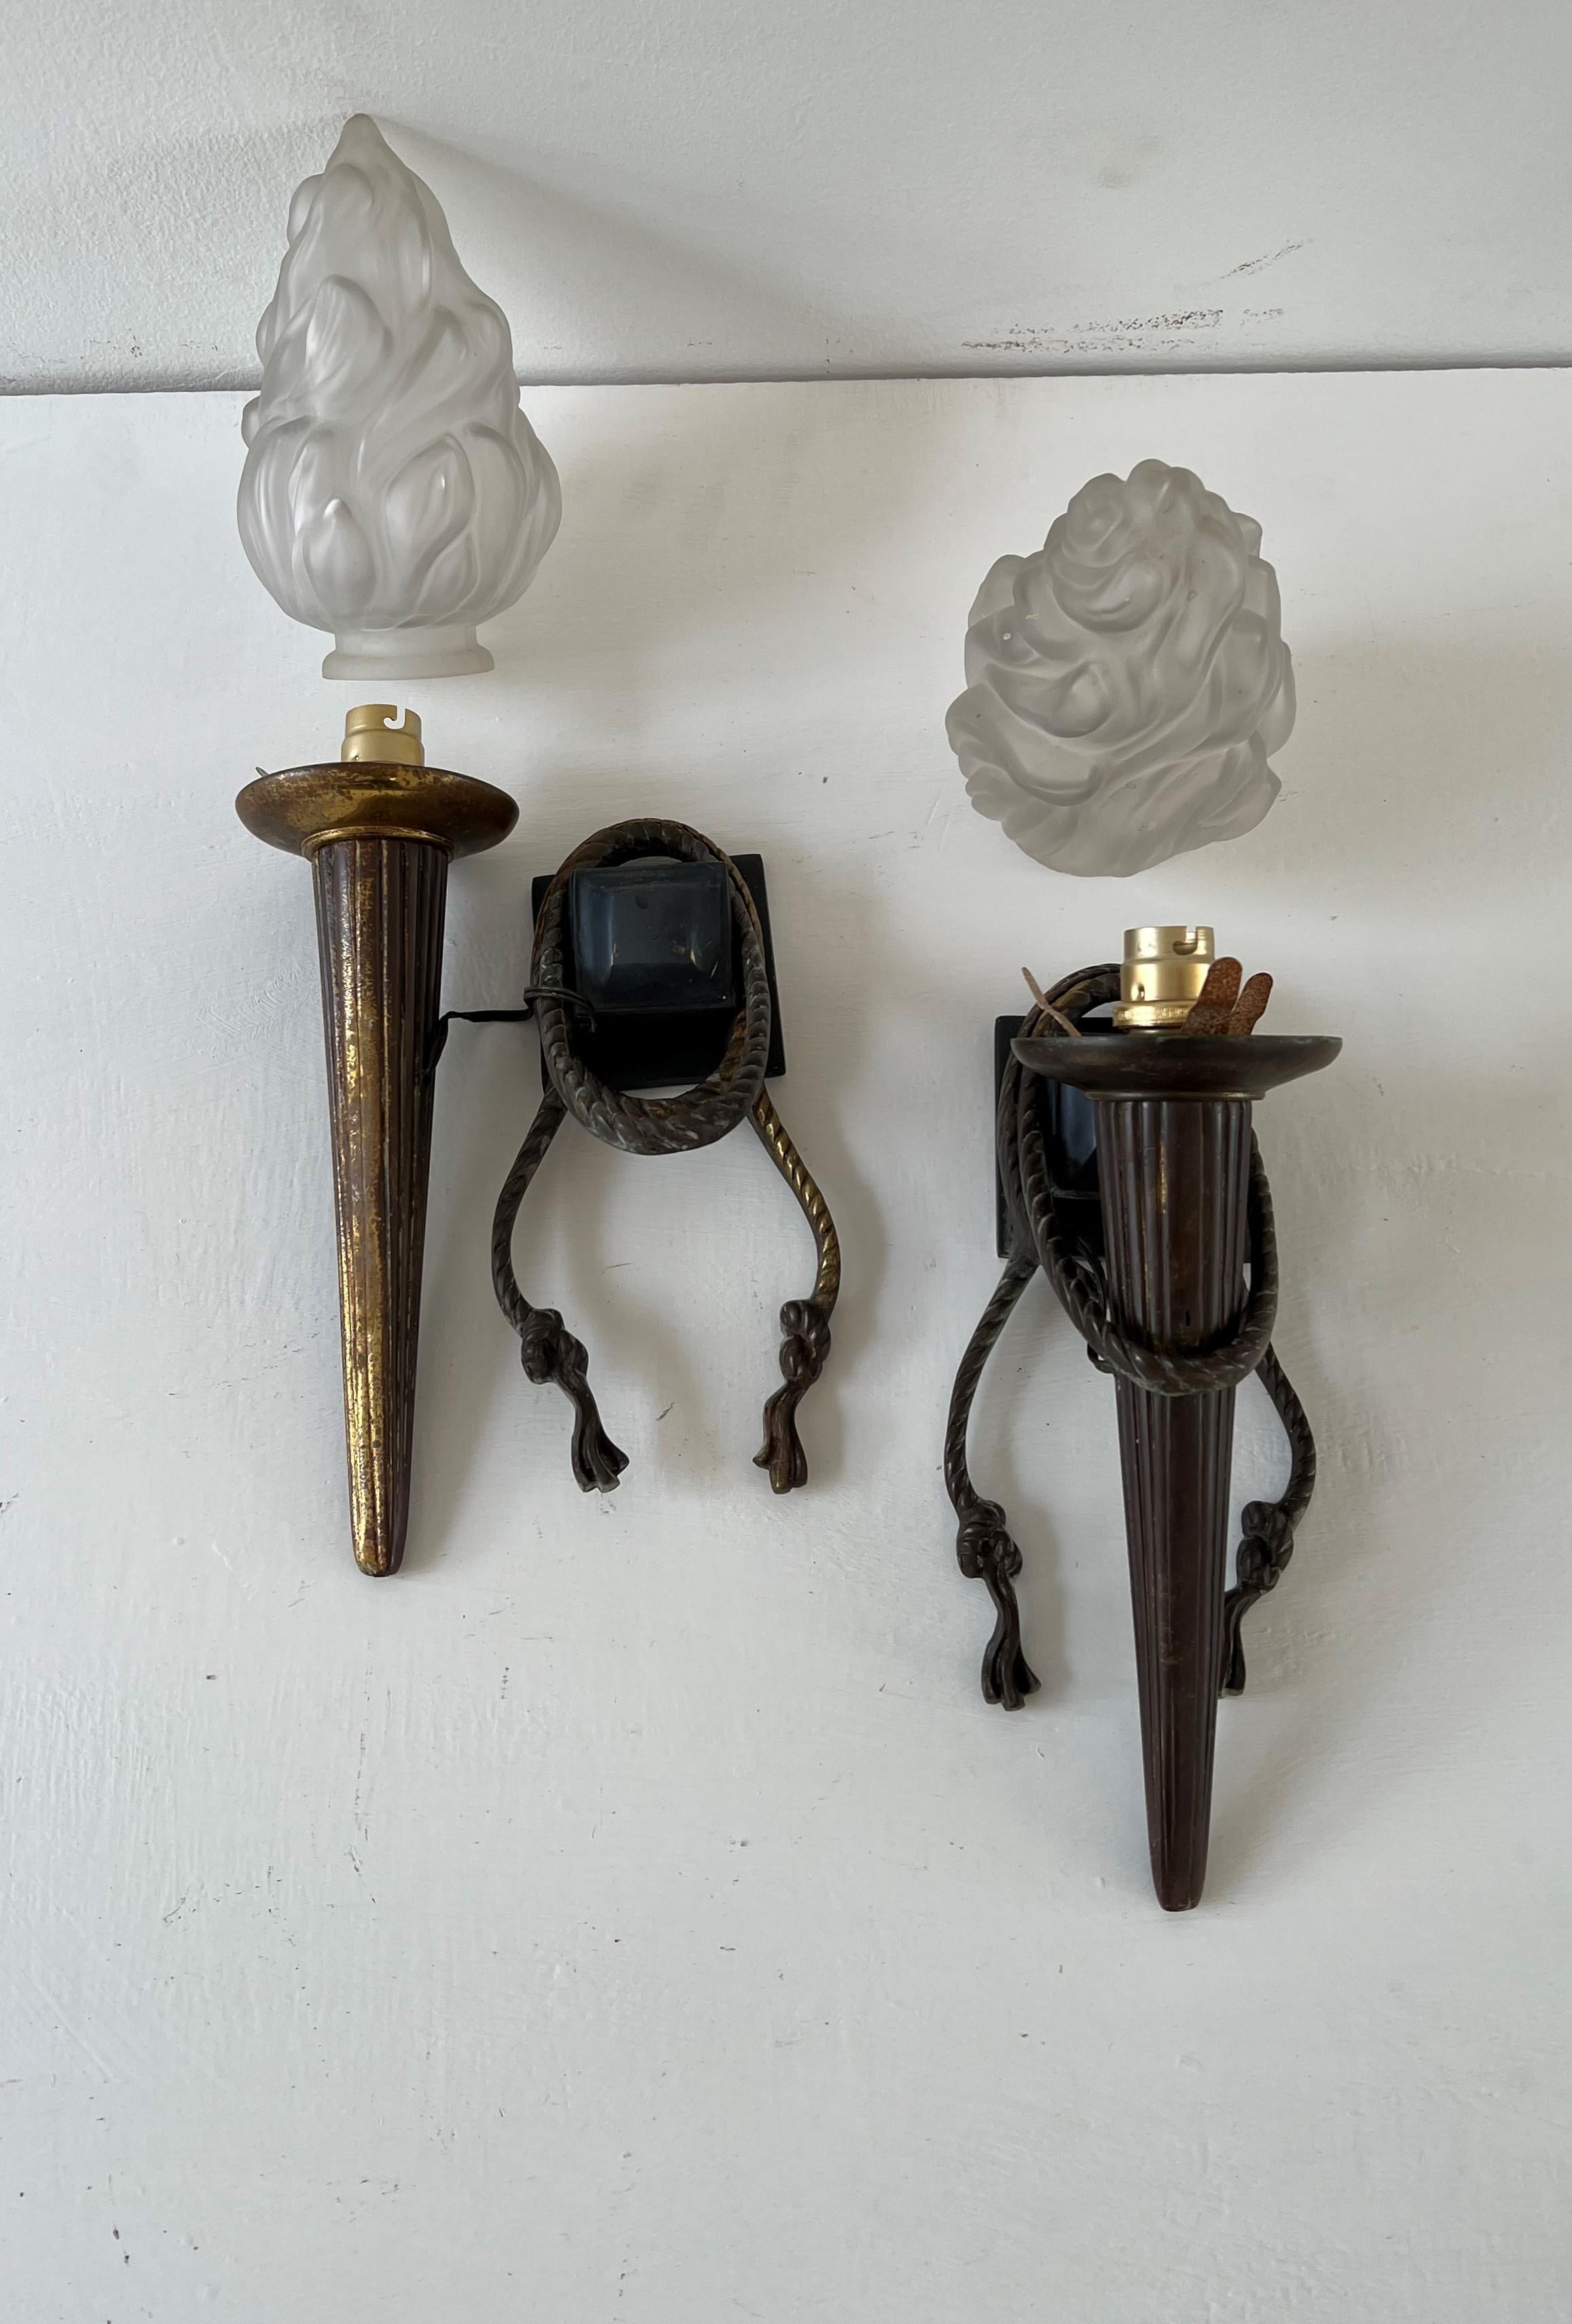 Very nice pair of sconces manufactured in heavy bronze and with pressed glass lamp shades depicting Torches.
These hold bayonet bulbs but can be changed for more modern ones easily.
There is some rubbing to the back of one scone which shows the